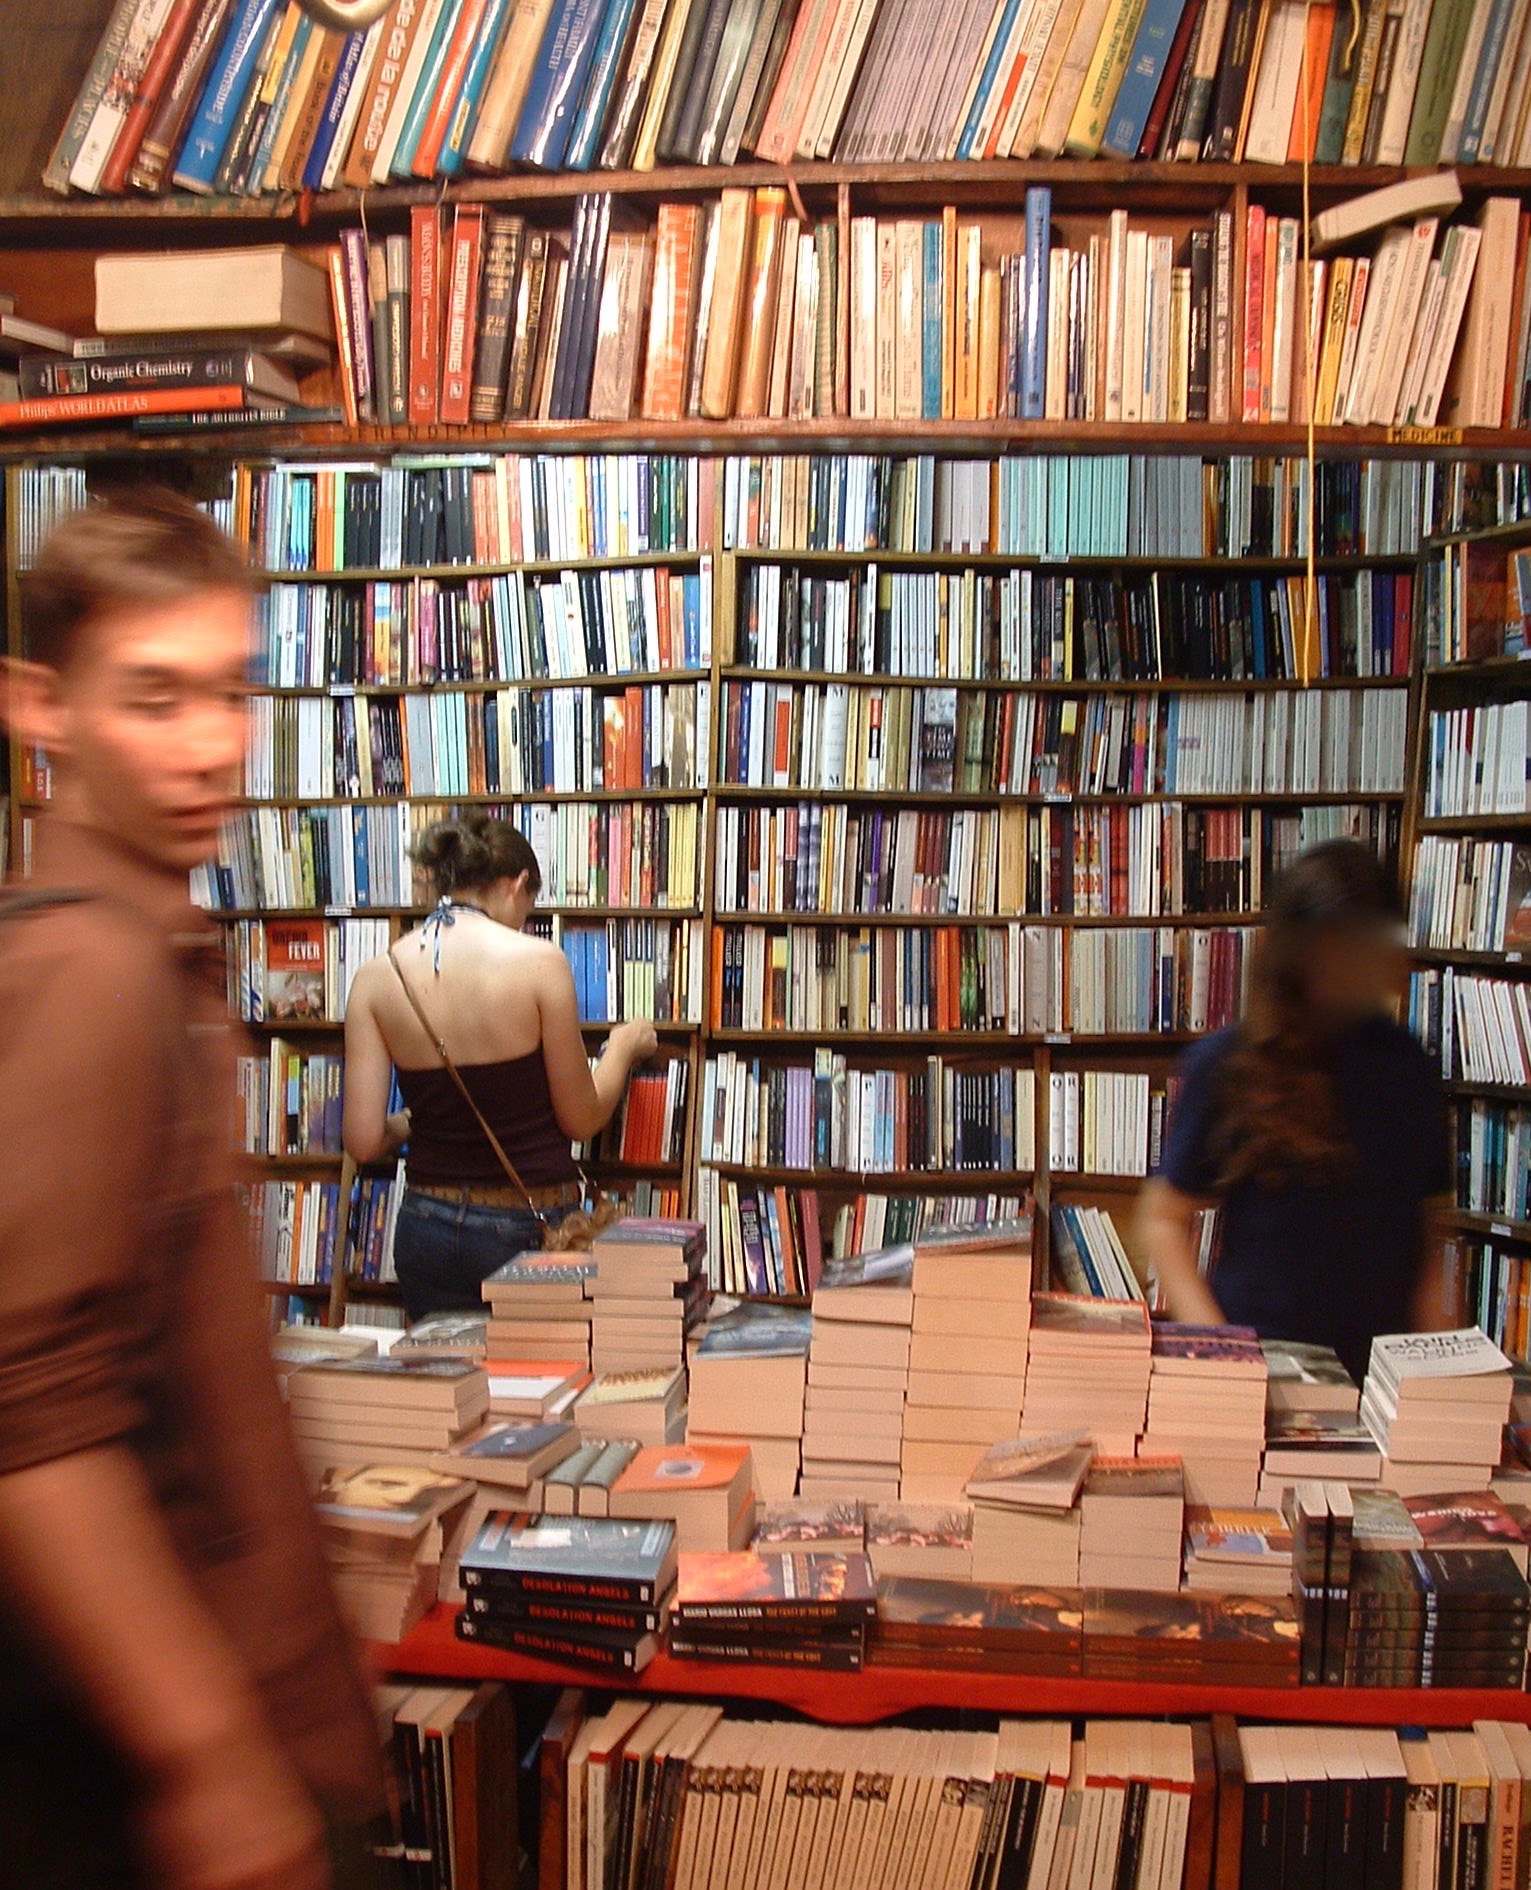 American Author Matthew McIntosh and his debut novel, Well, at Shakespeare and Company bookstore, Paris, France.